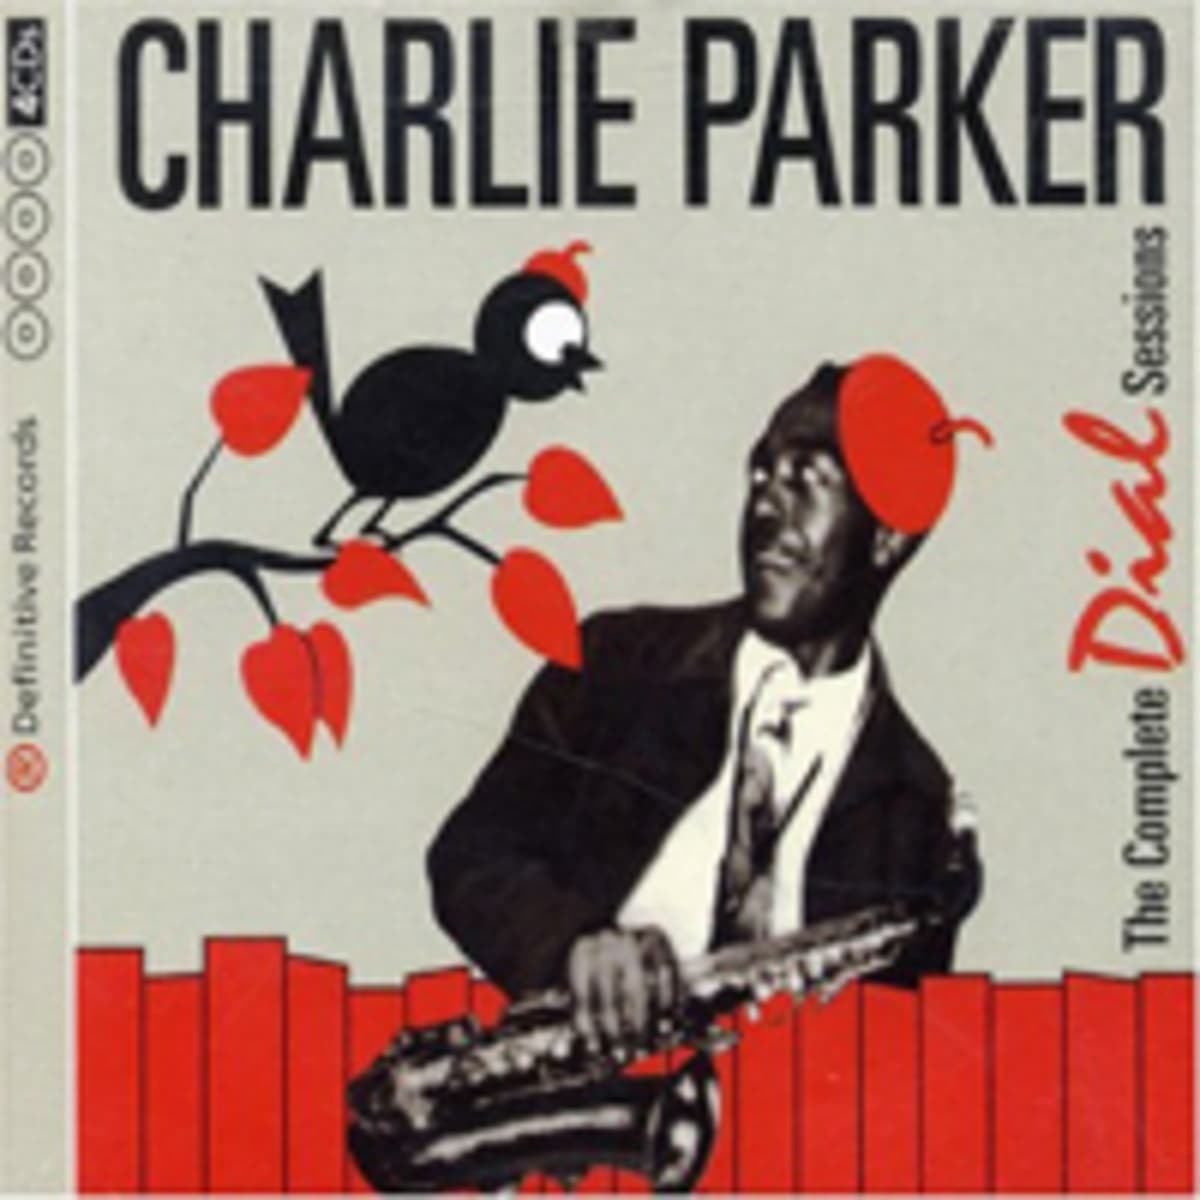 Charlie Parker discography - Wikipedia